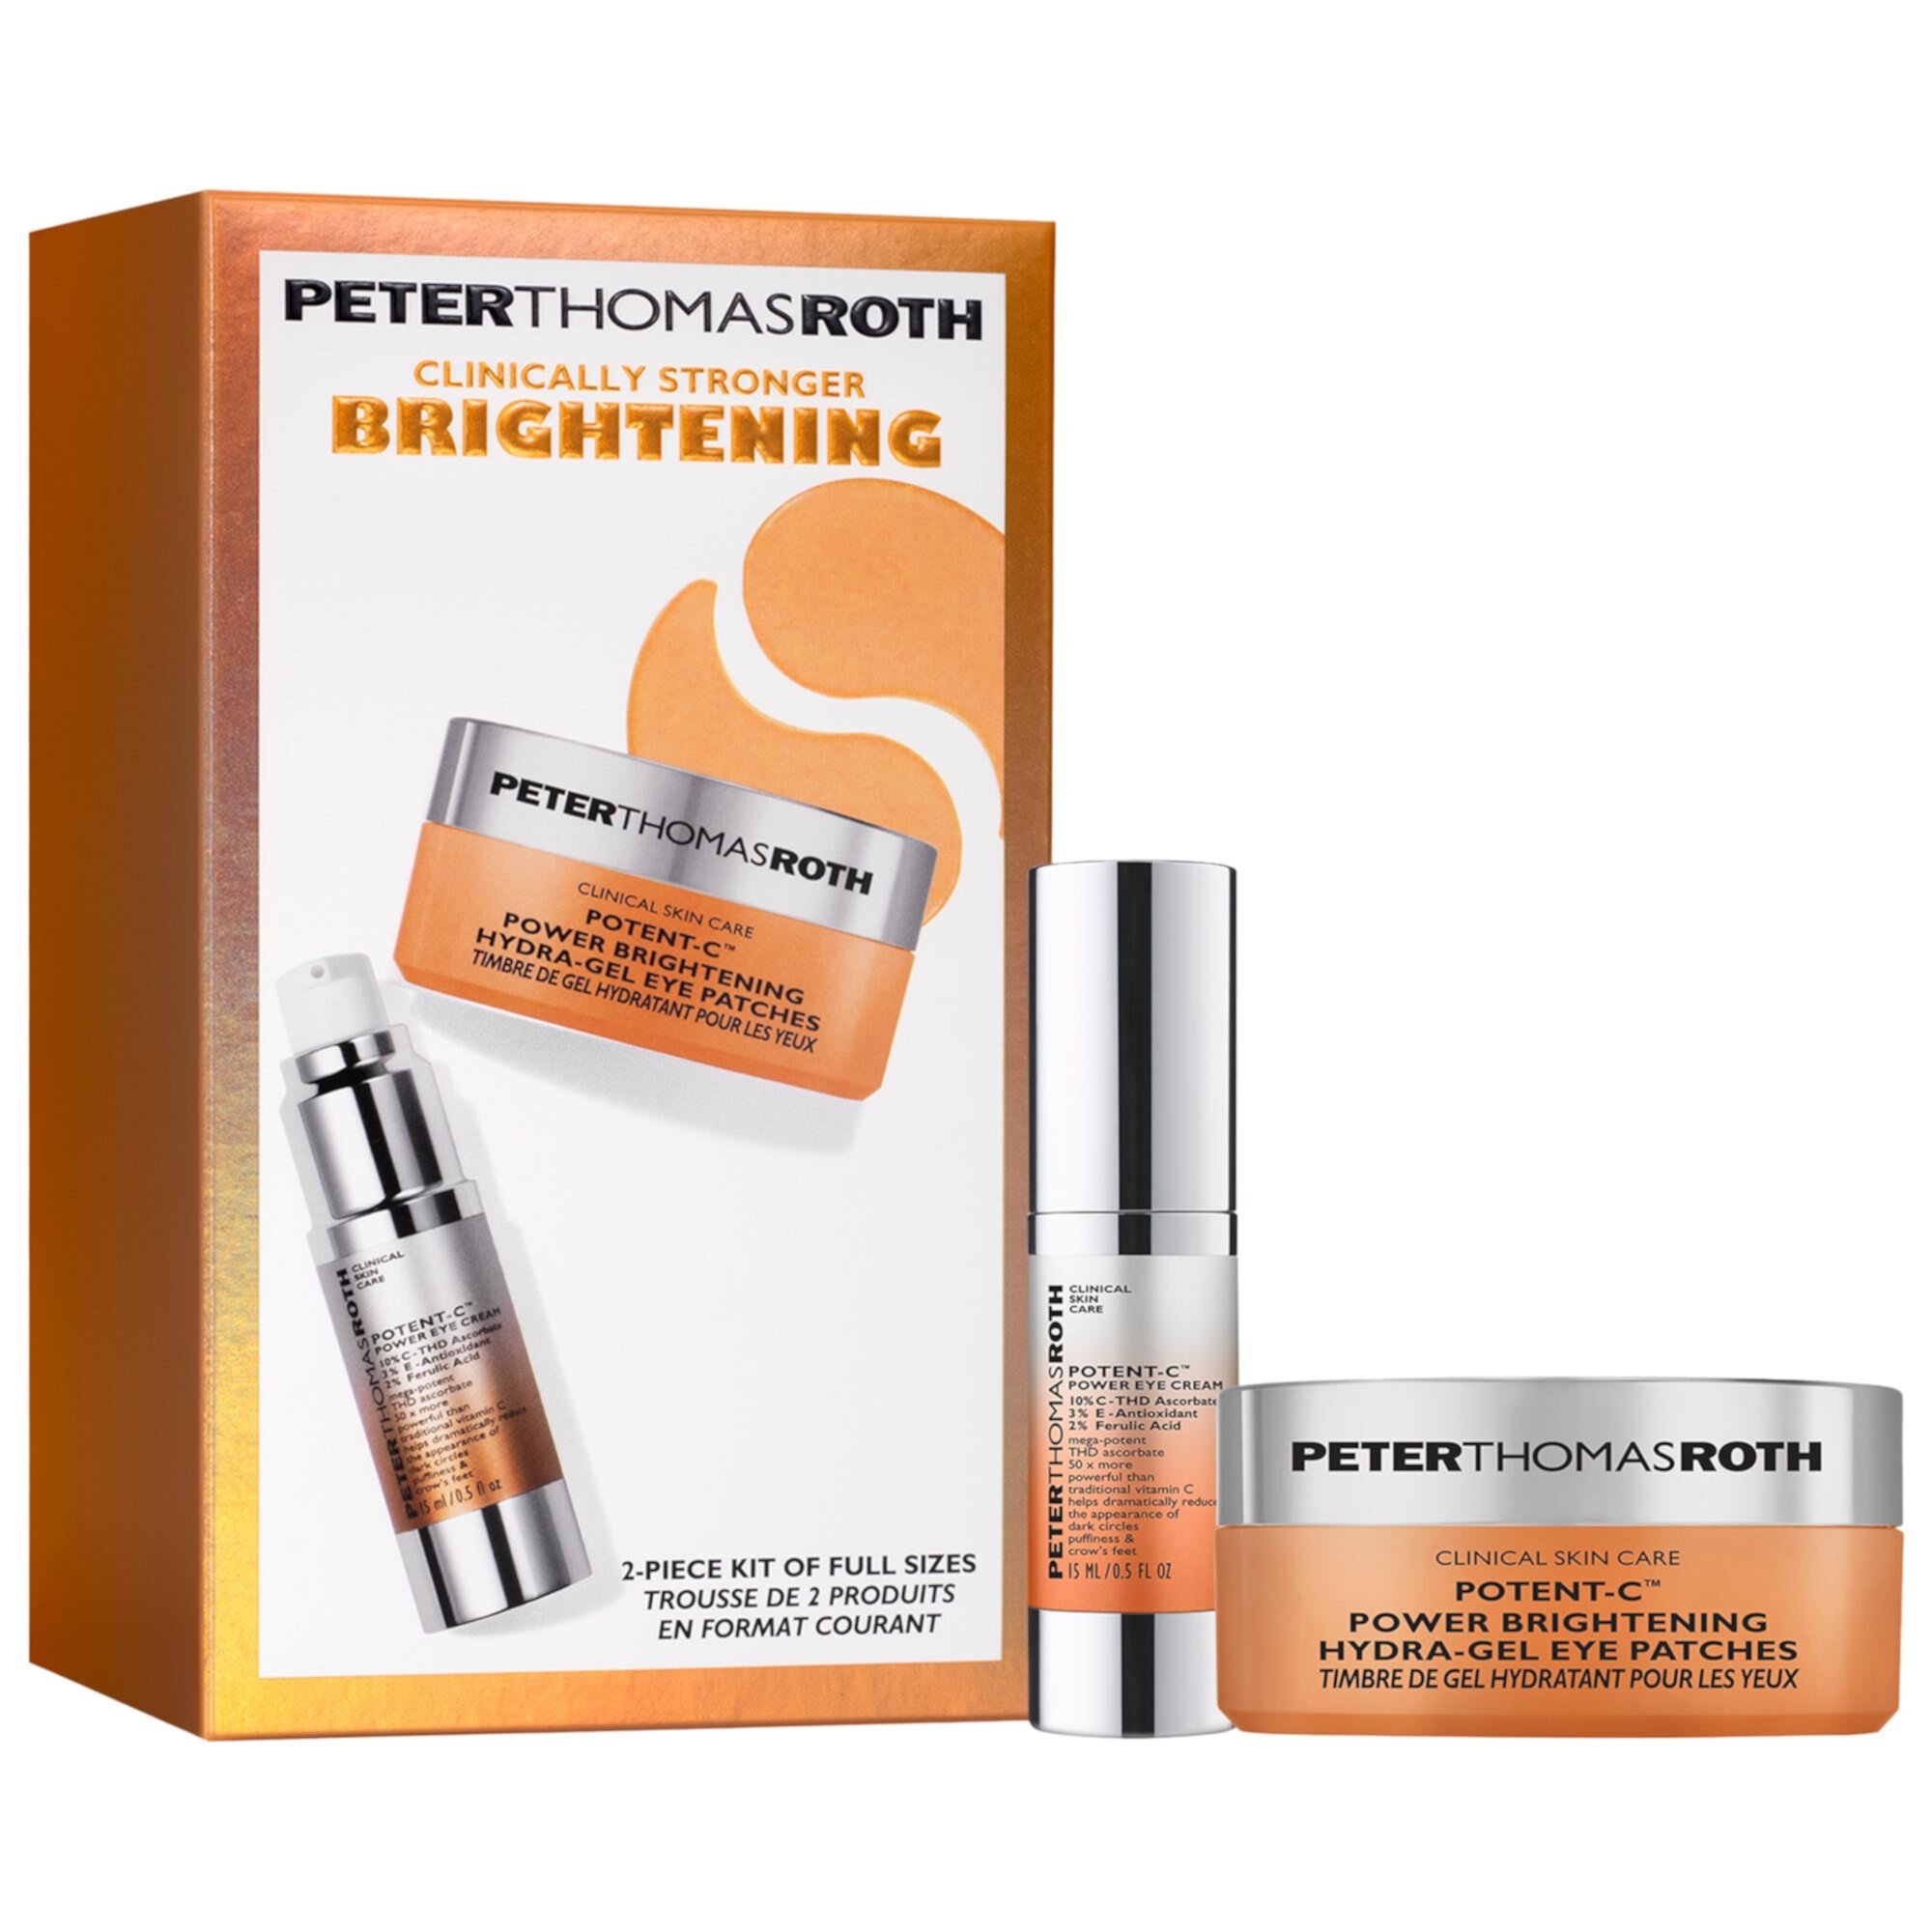 Clinically Stronger Brightening Full-Size 2-Piece Kit Peter Thomas Roth